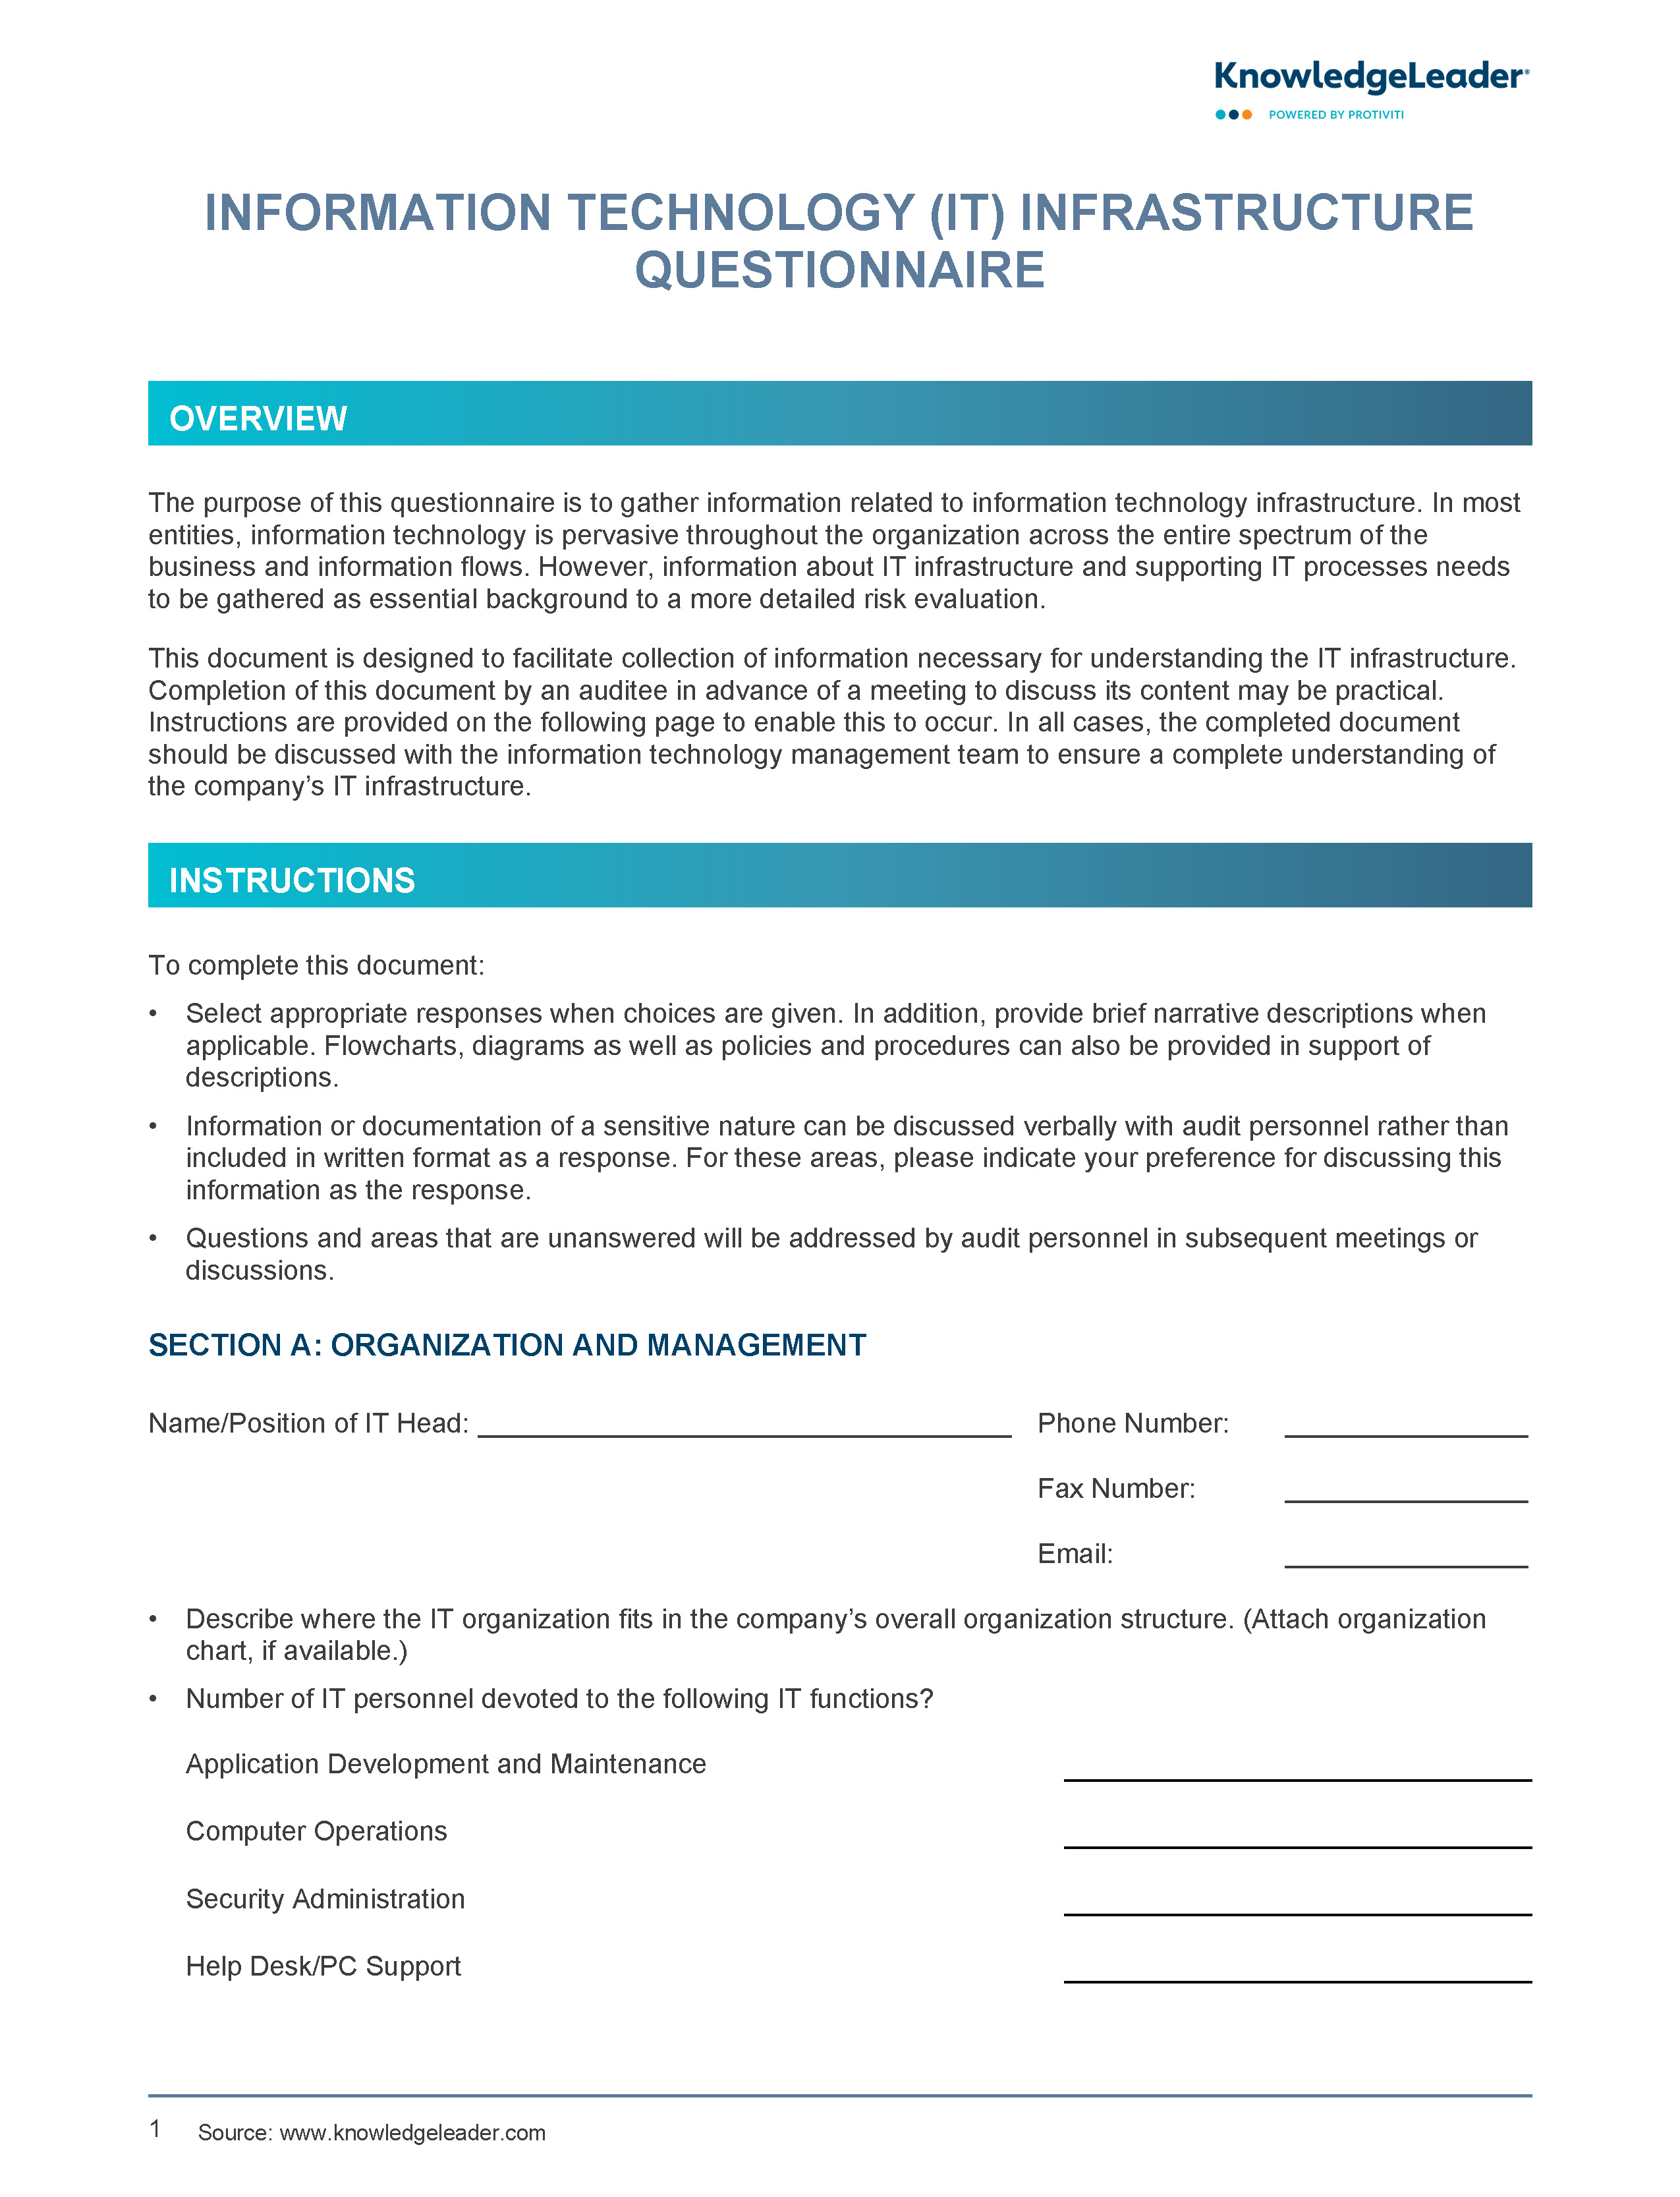 Screenshot of the first page of Information Technology Infrastructure Questionnaire